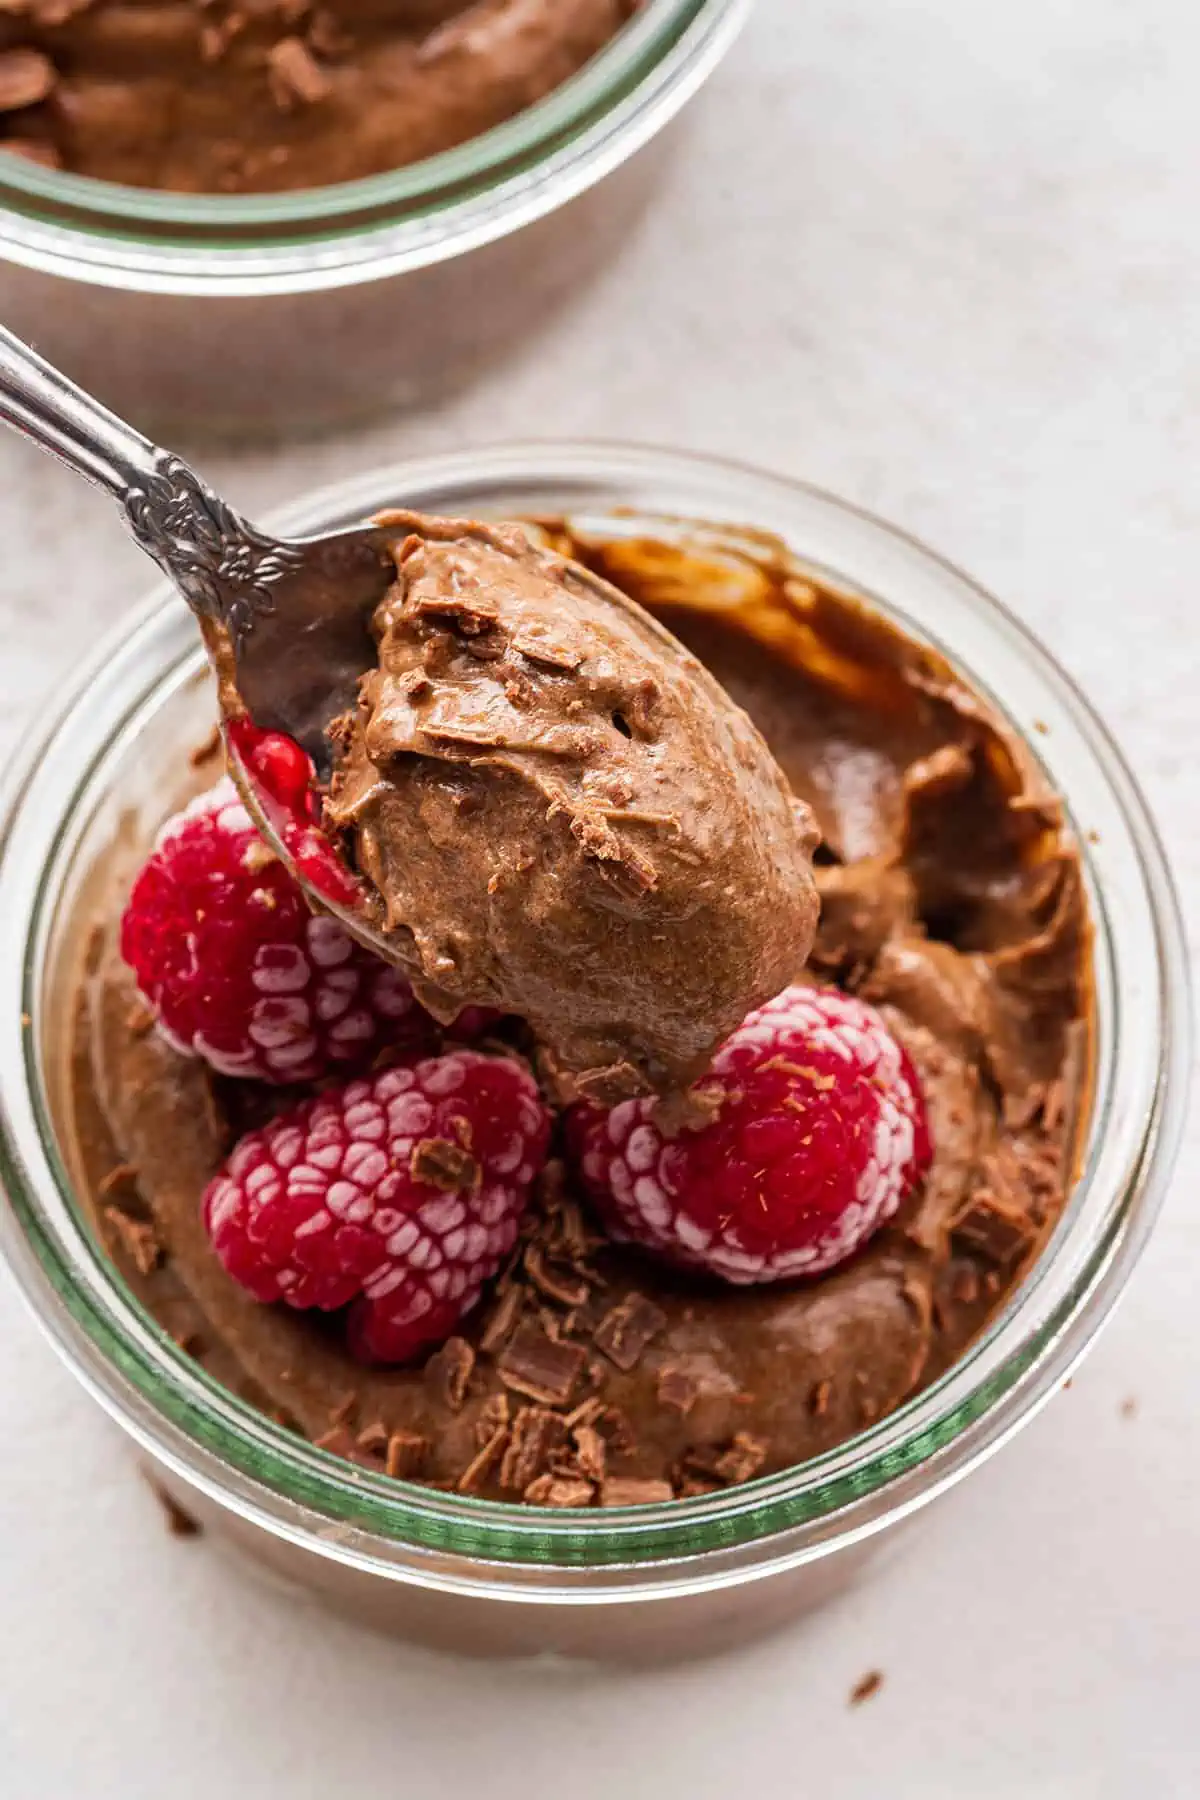 A spoon with a biteful of creamy chocolate avocado mousse